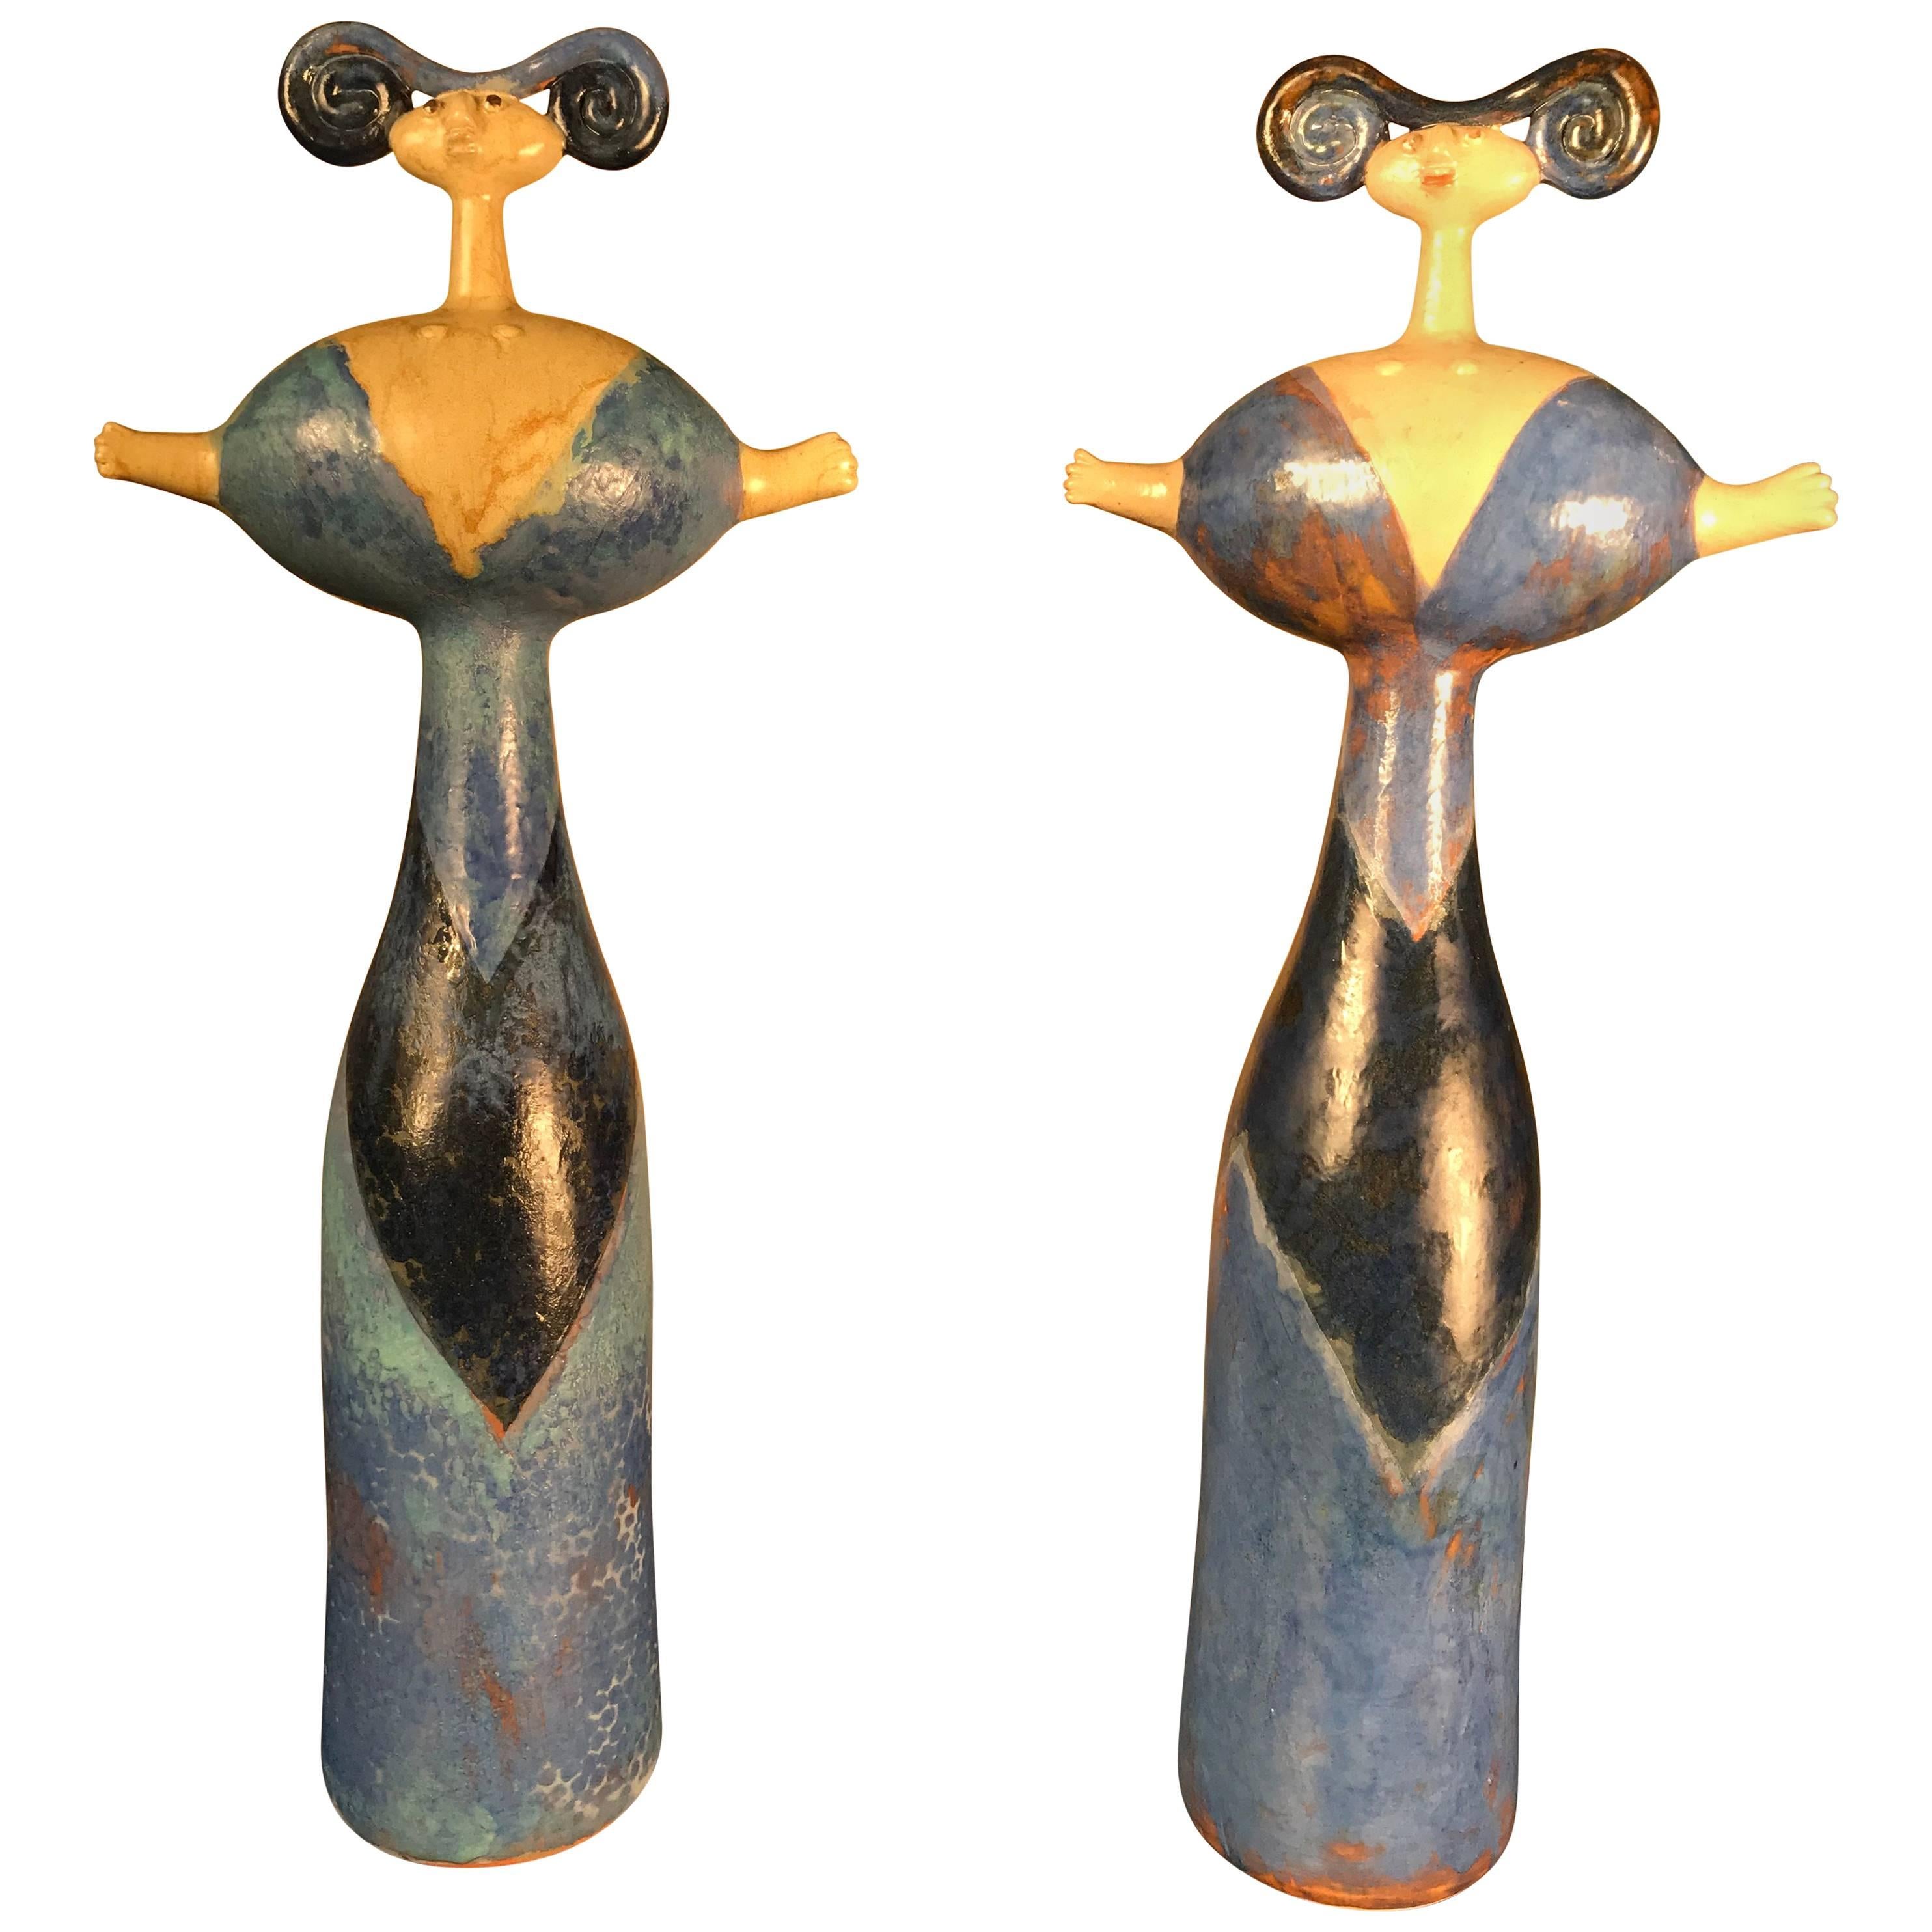 "Mimi" Master Work Pair of Sculptures Hand-Painted by Eva Fritz-Lindner